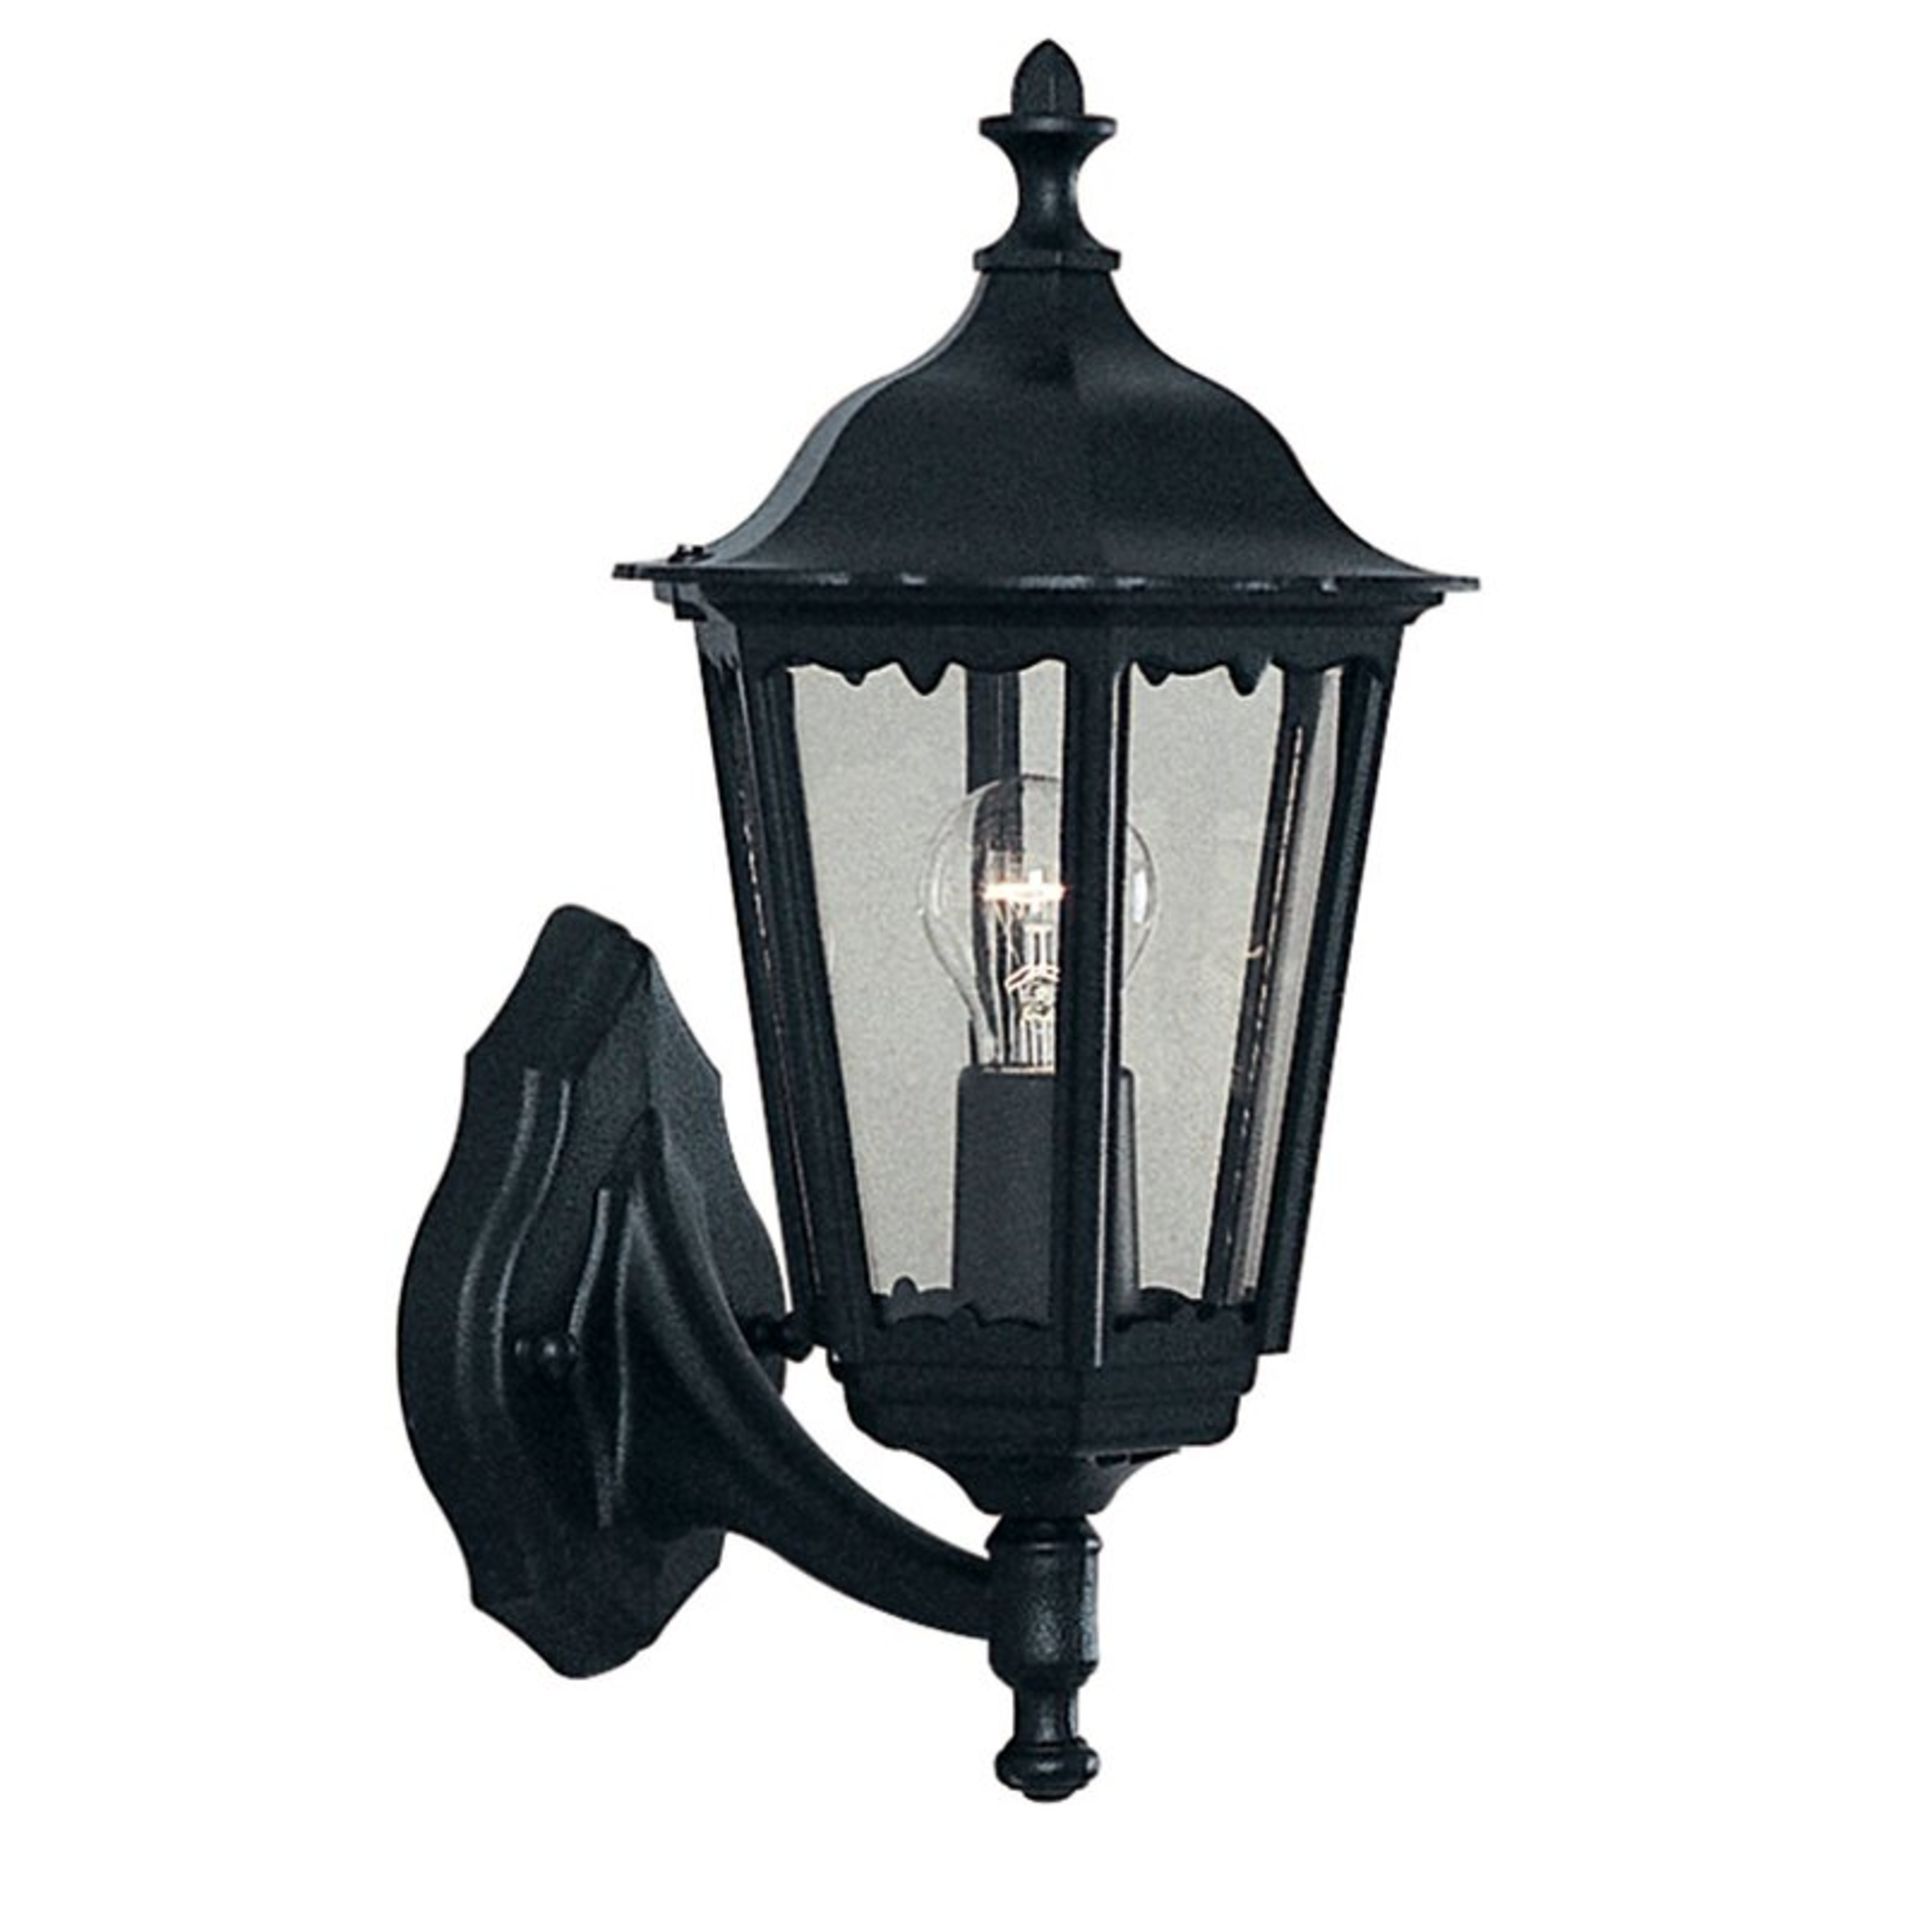 Boxed Black Copper Outdoor Garden Wall Light RRP £80 (Pictures Are For Illustration Purposes